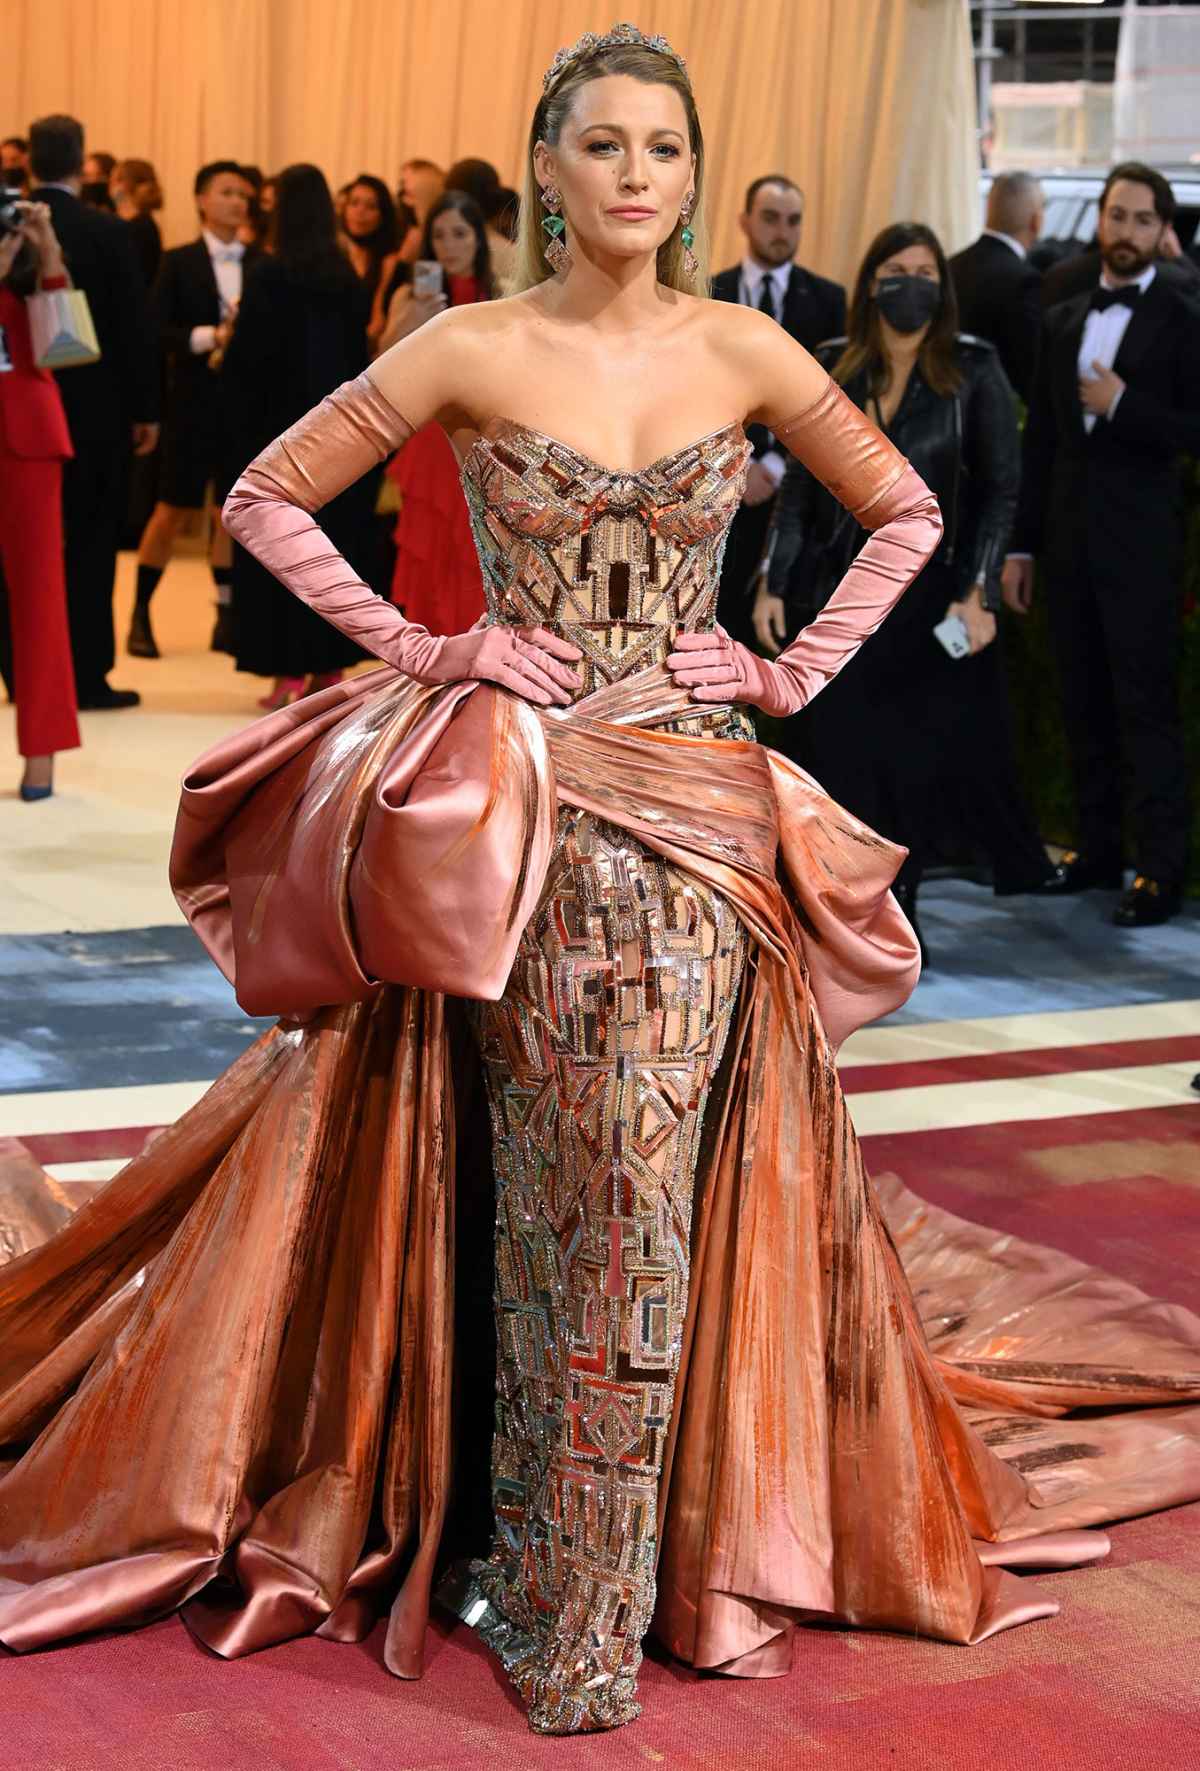 Met Gala Fashion 2022: Best Red Carpet Dresses, Celebrity Outfits, Looks –  StyleCaster